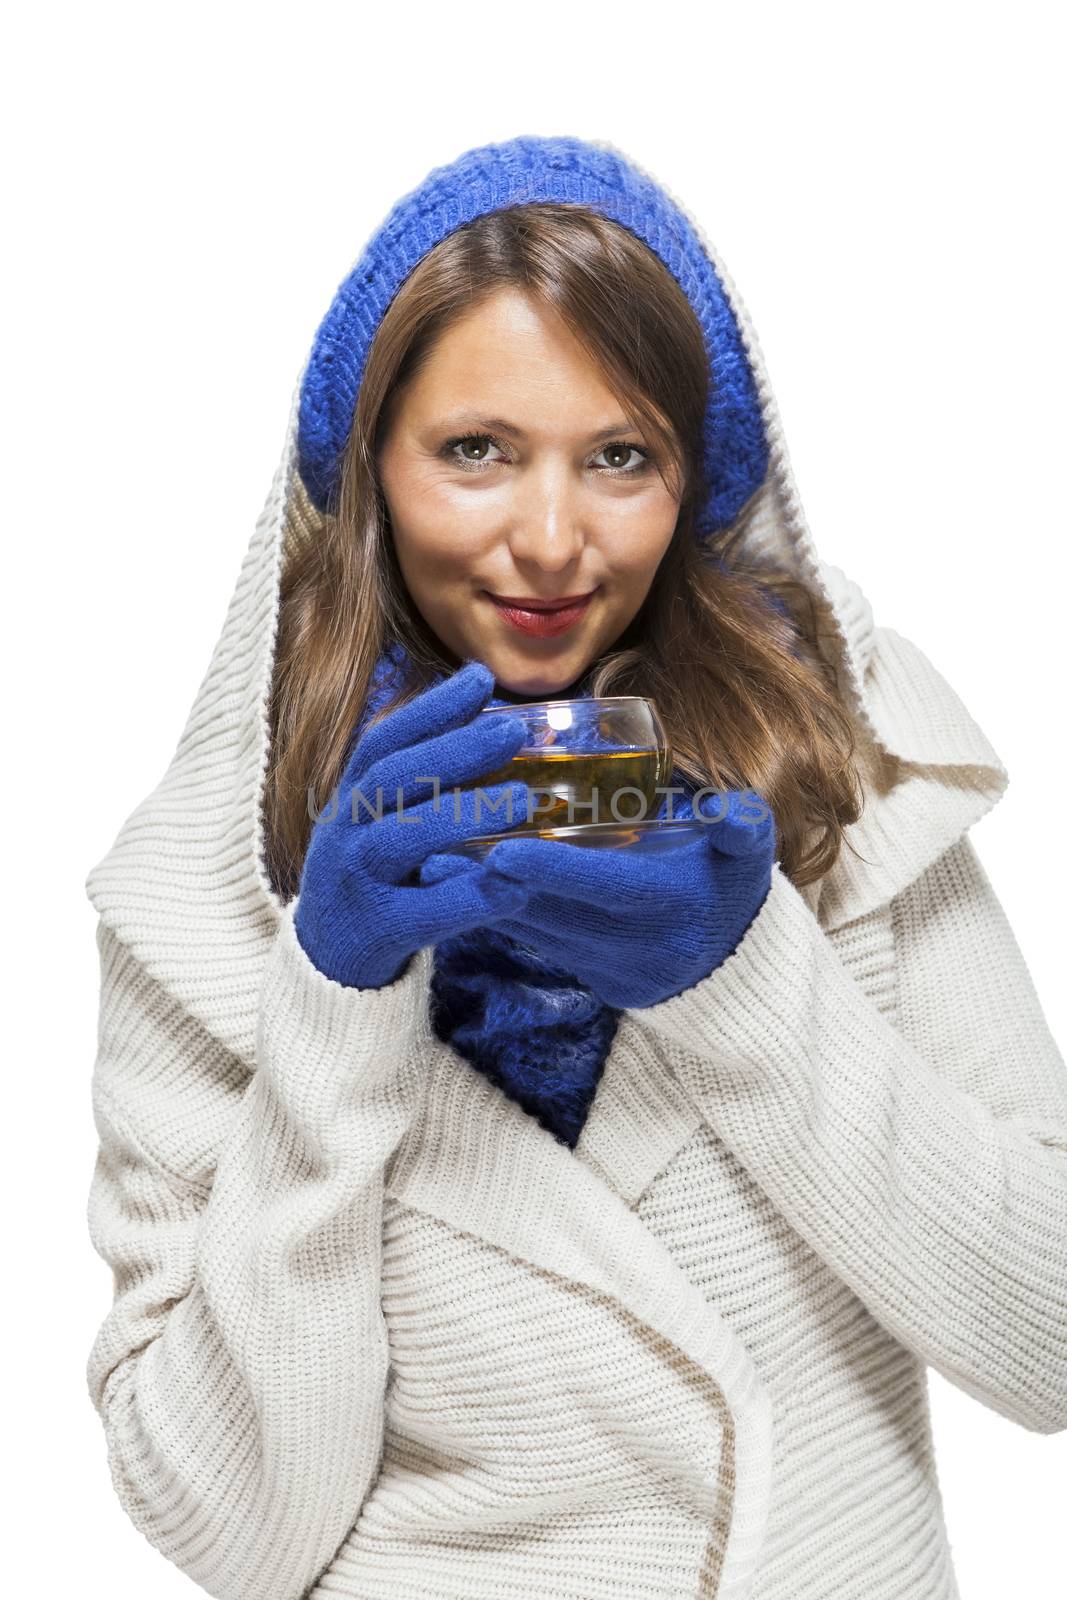 Fashionable young woman in a blue knitted winter ensemble and cowl neck jersey sipping a cup of hot tea with a smile in an effort to keep warm, isolated on white